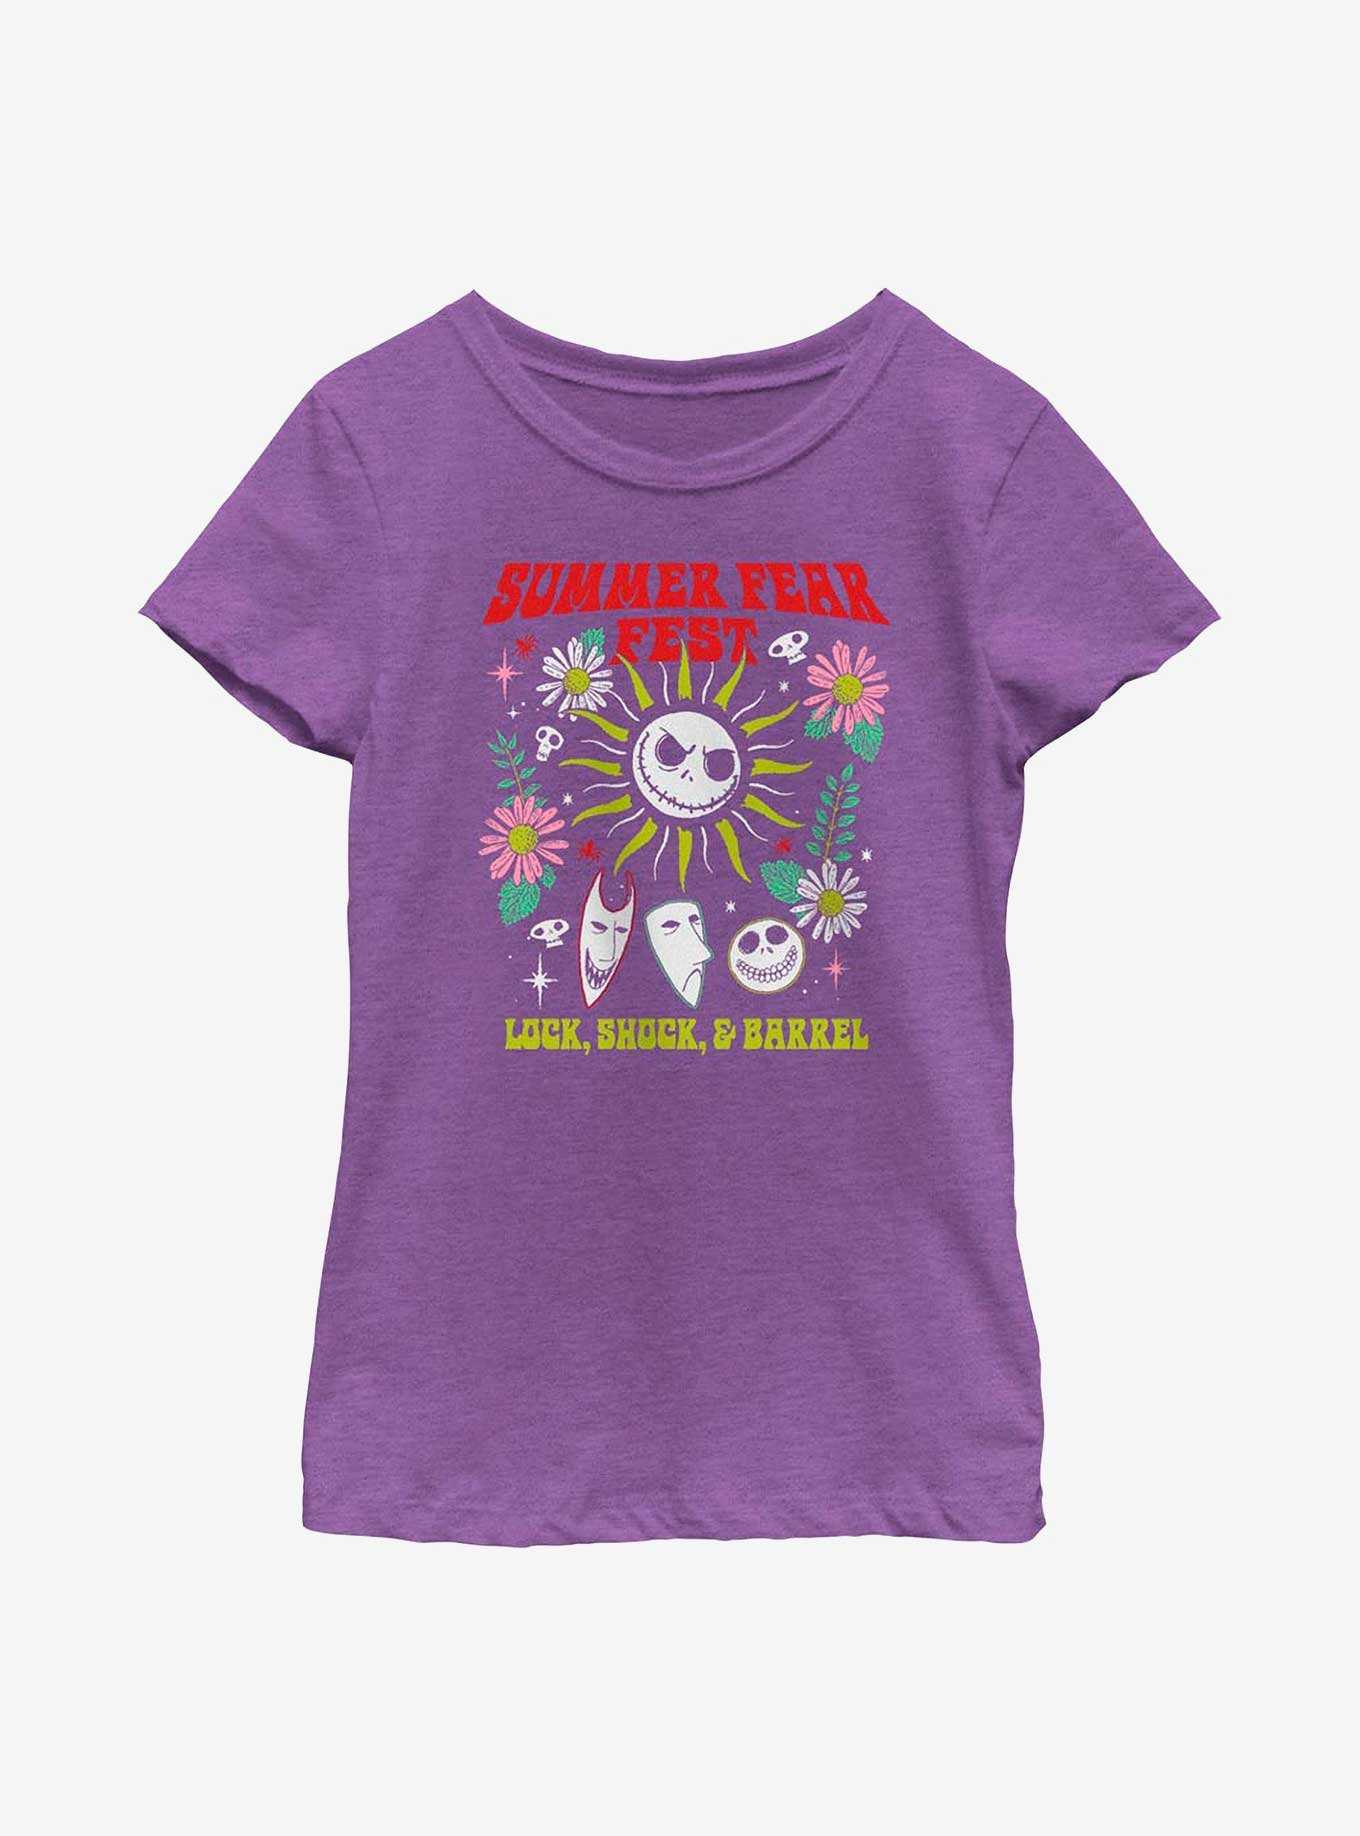 Disney The Nightmare Before Christmas Summer Back Youth Girls T-Shirt, , hi-res